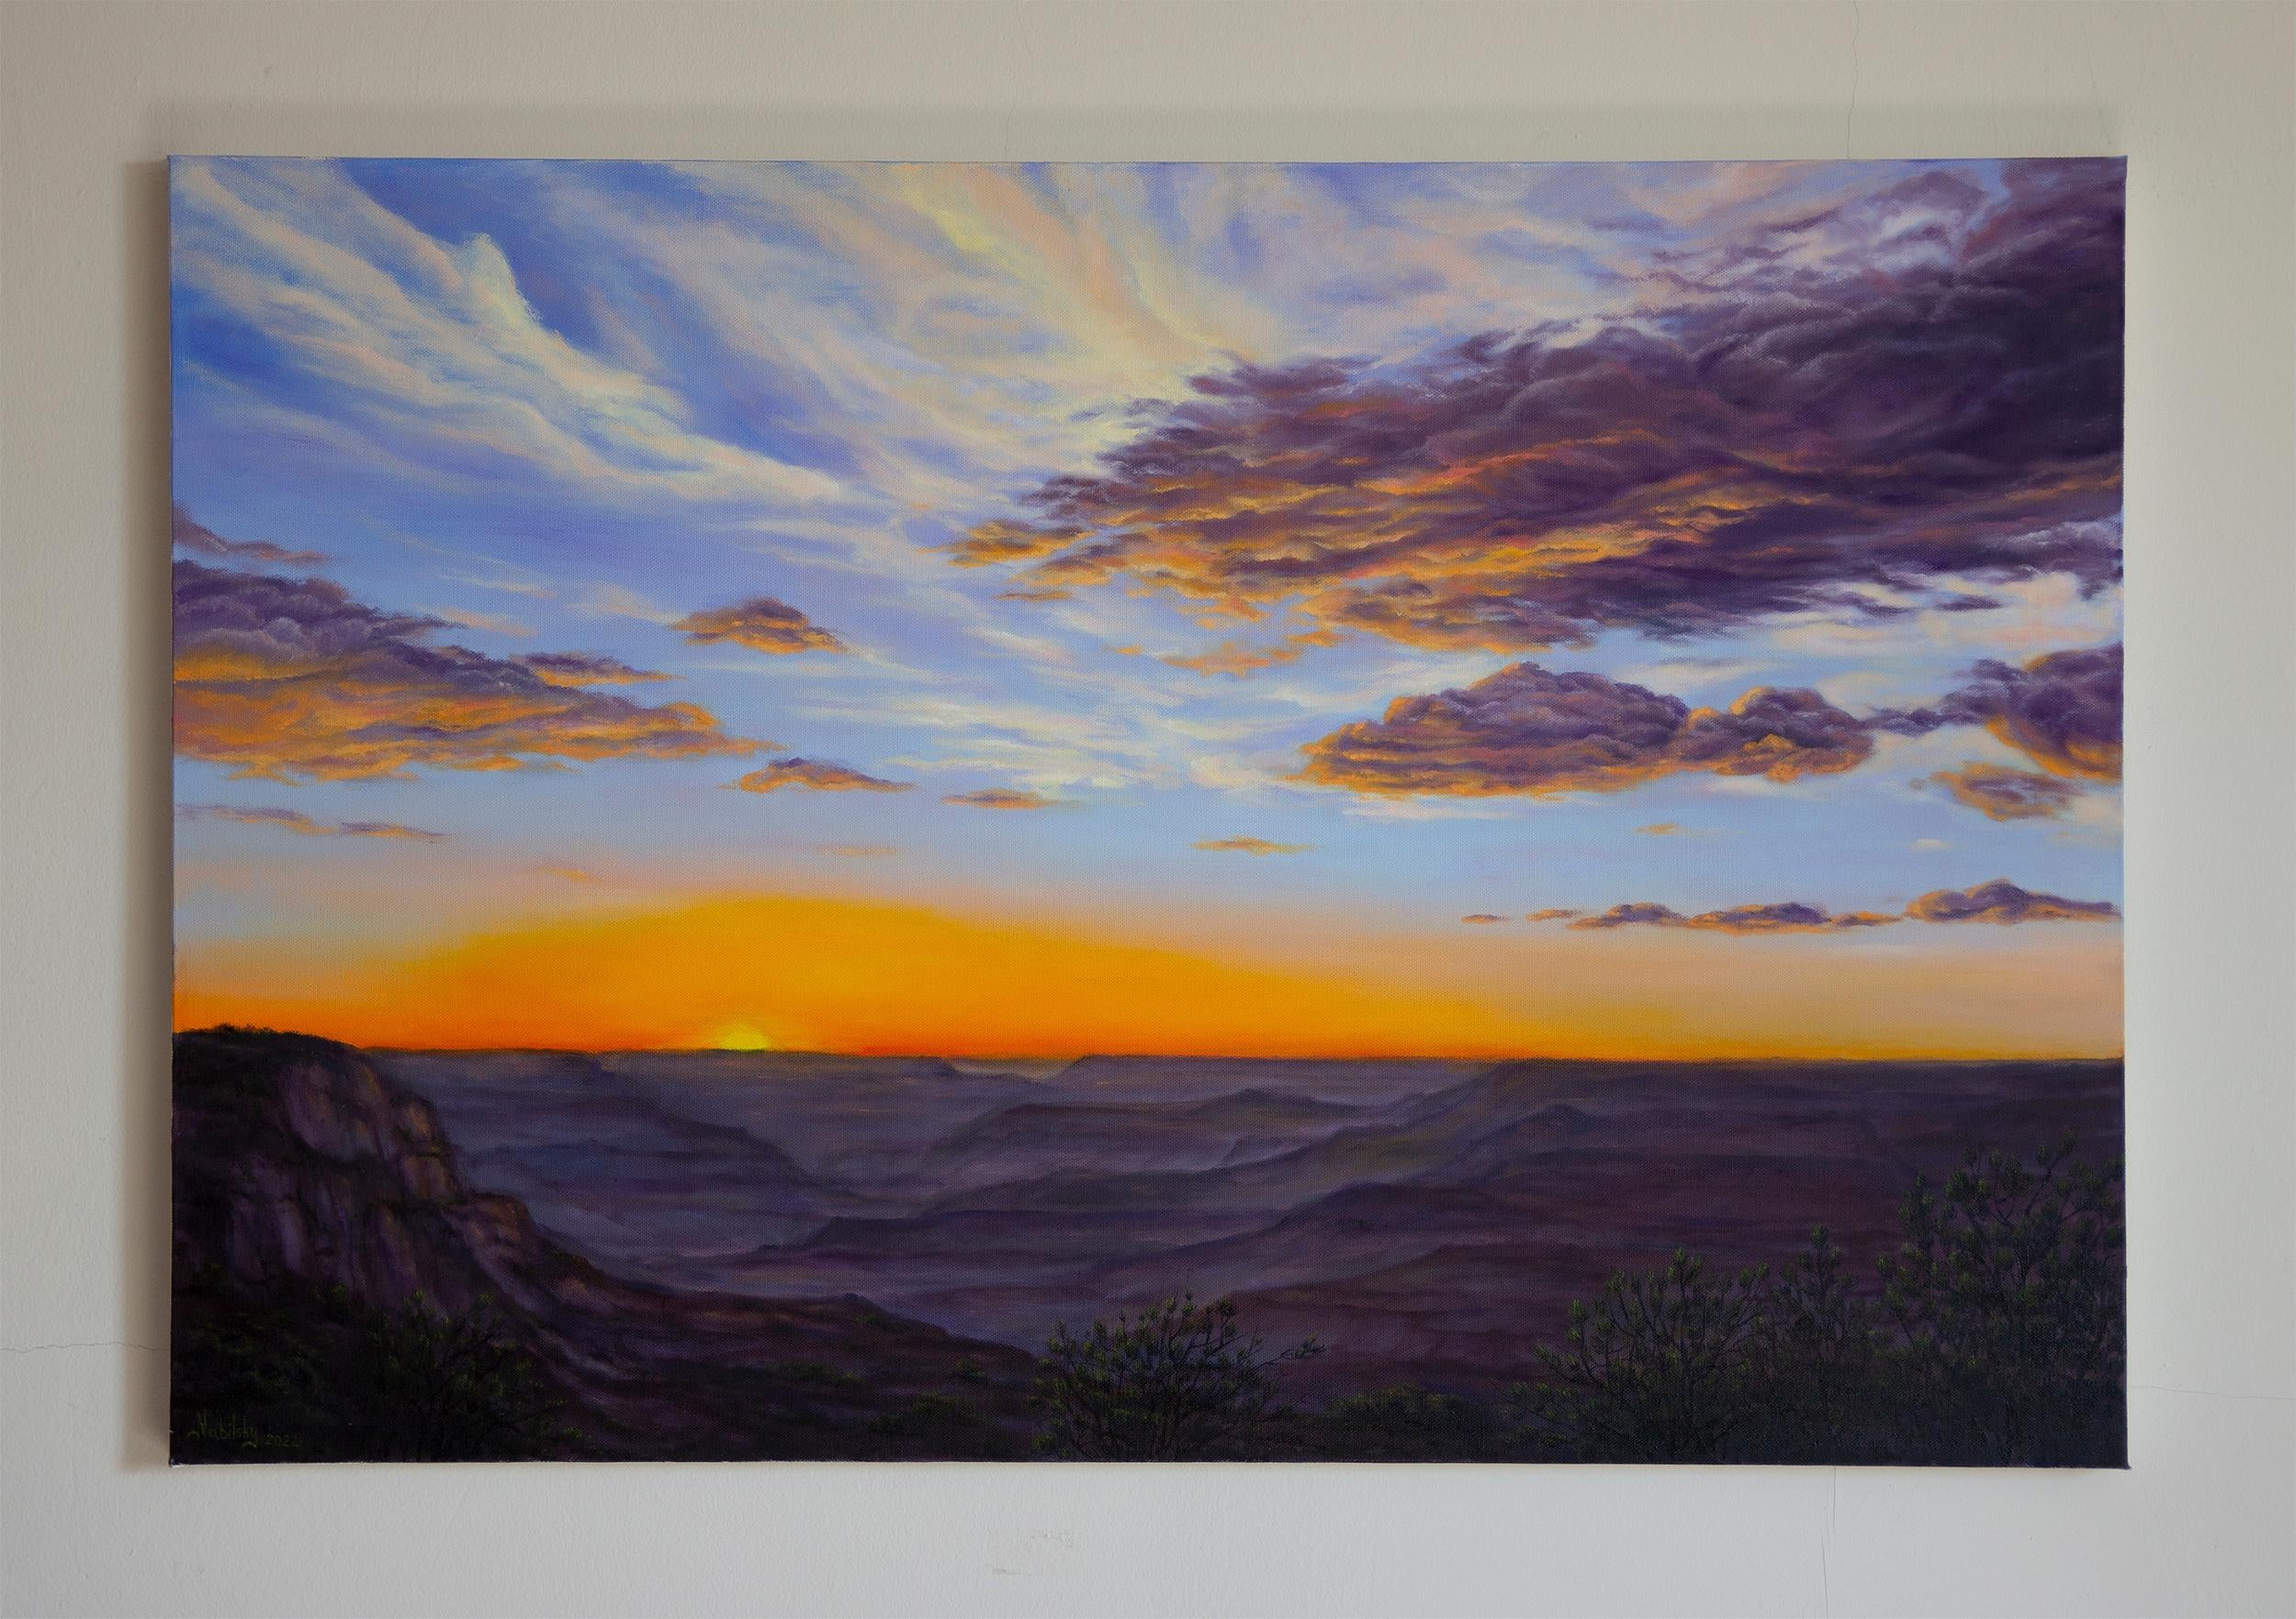 <p>Artist Comments<br>The sun sets on the Grand Canyon, leaving a blanket of soft light over its ridges. It is a magical time as a mesmerizing array of colors fills the landscape. The rock formations' rugged texture and dimly lit surroundings